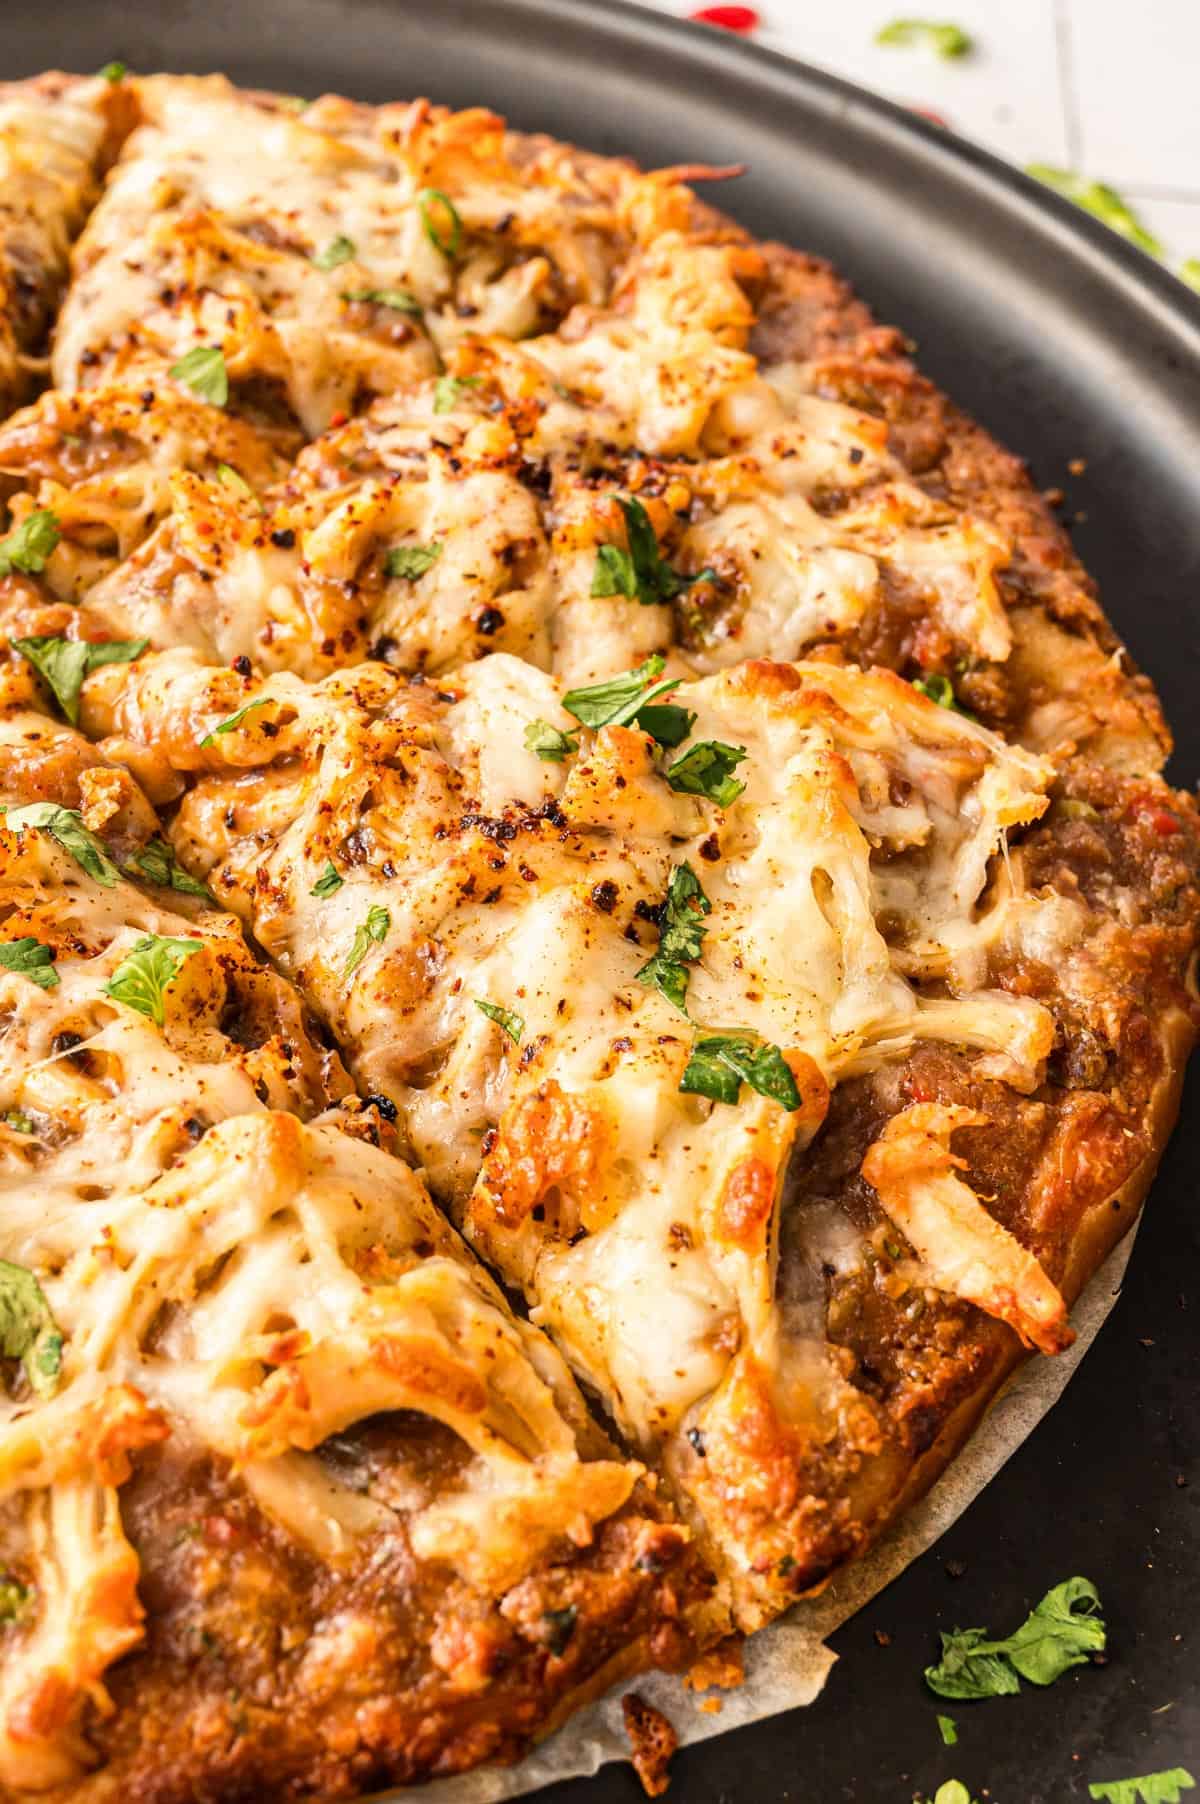 A pan of cheesy pizza with green garnish.